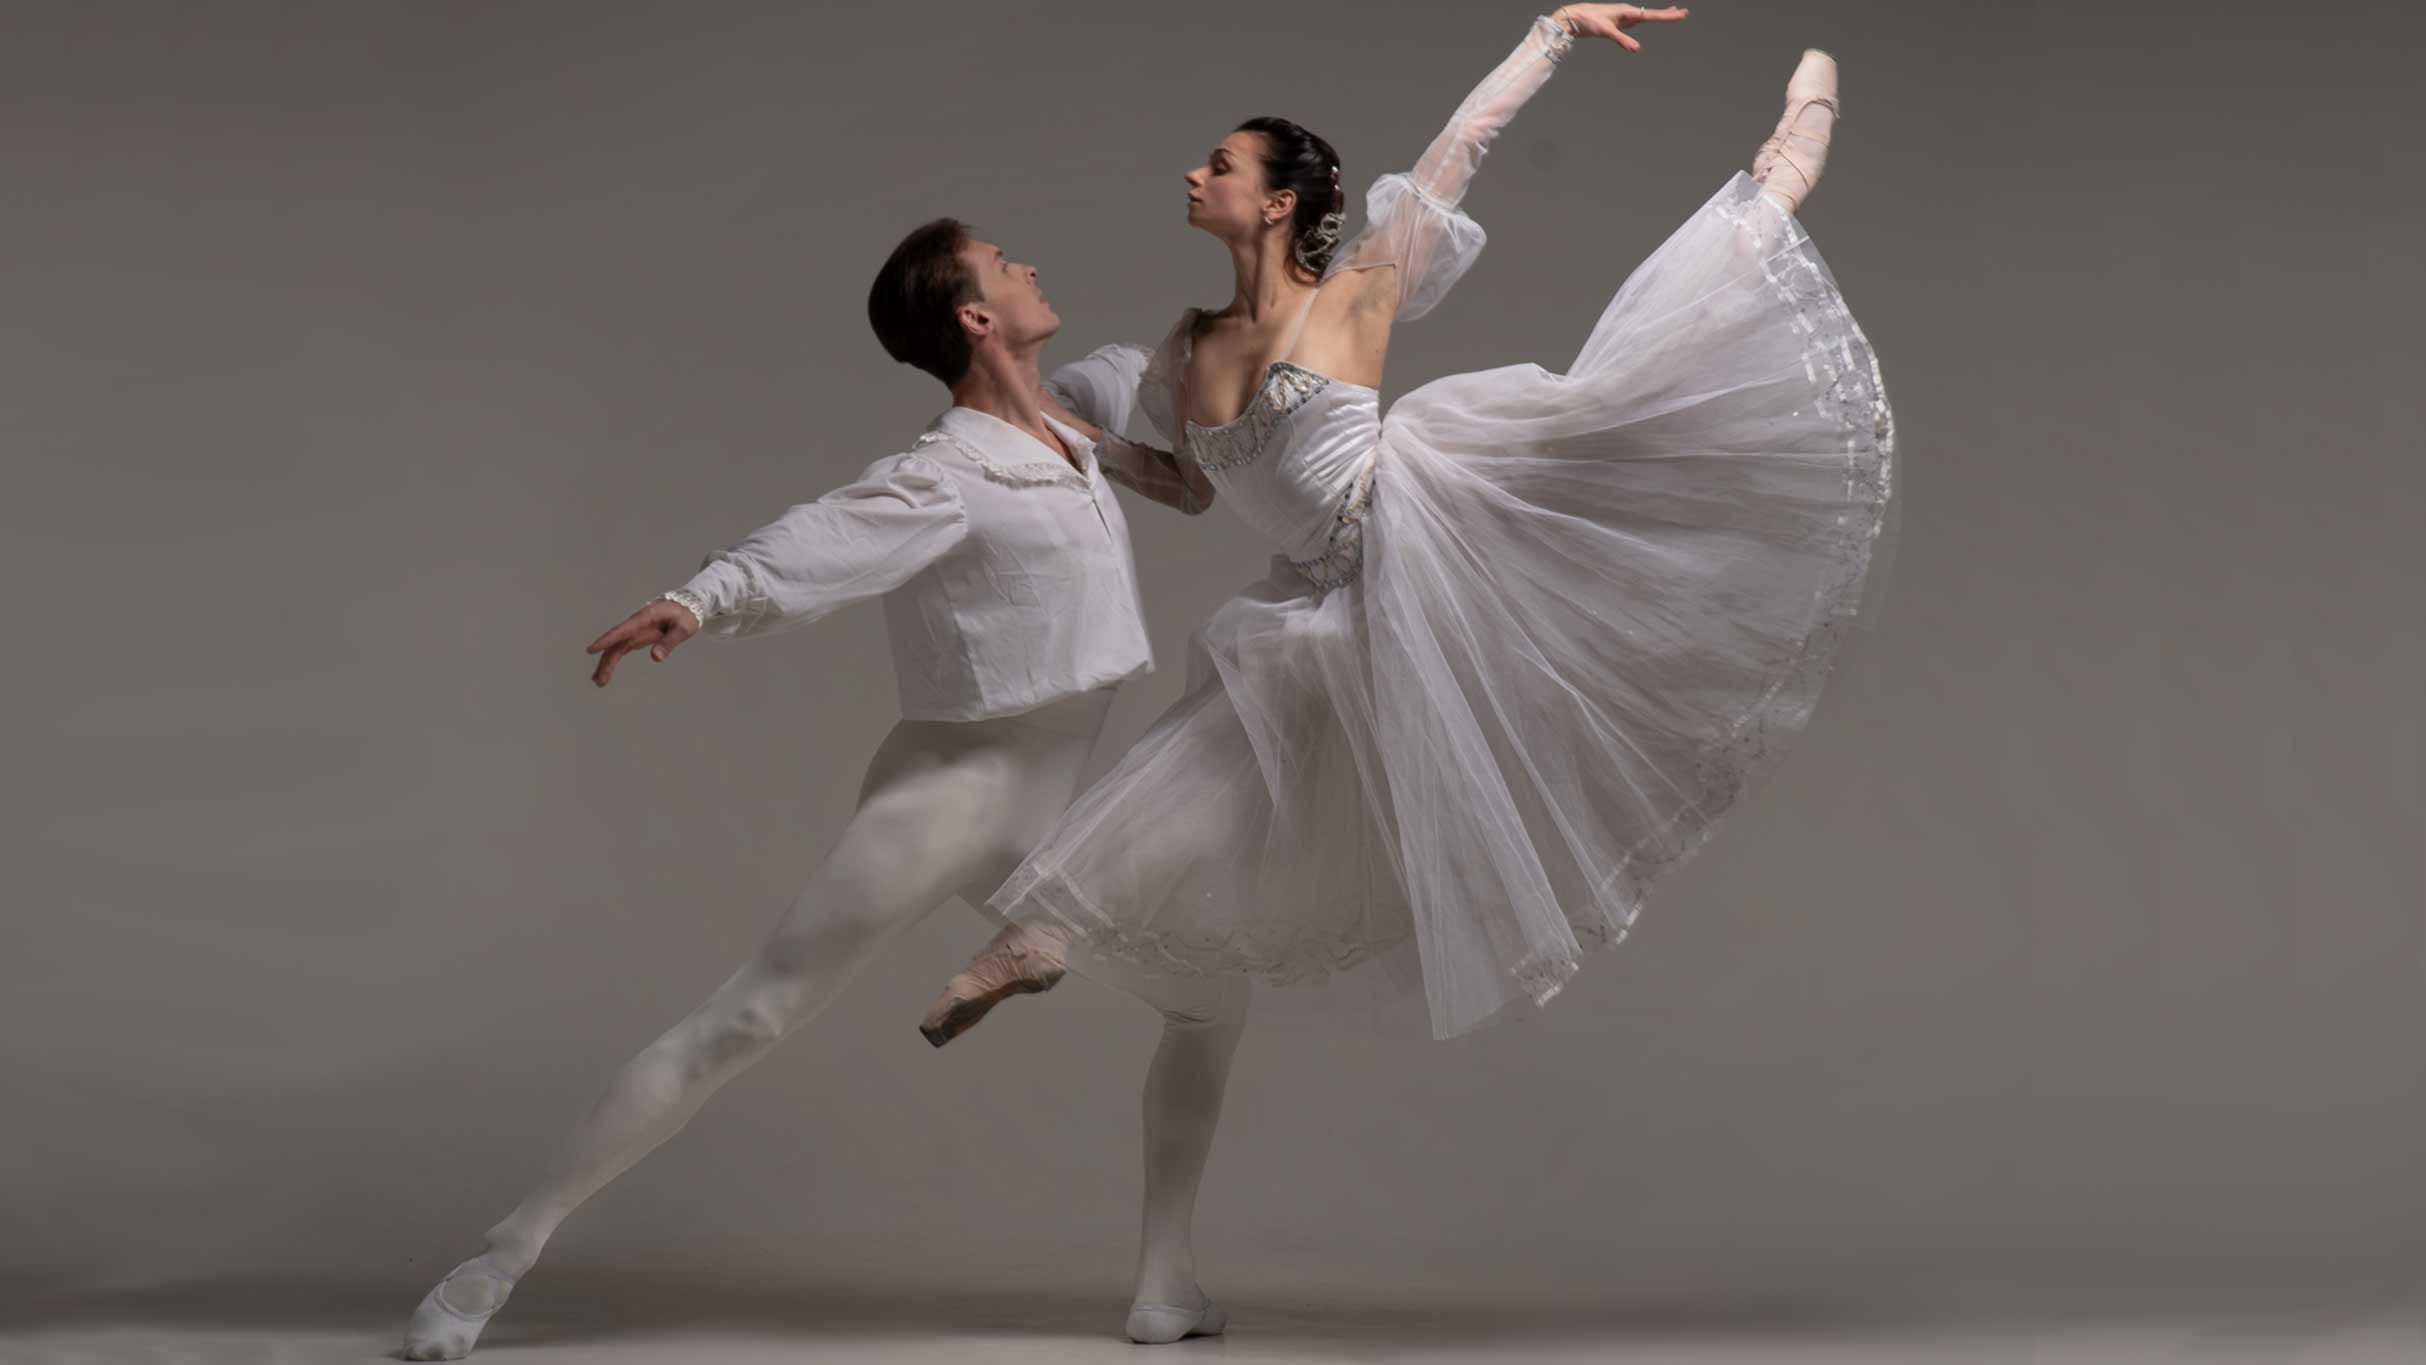 Romeo And Juliet w/ American Ballet Theatre at Metropolitan Opera House – New York, NY